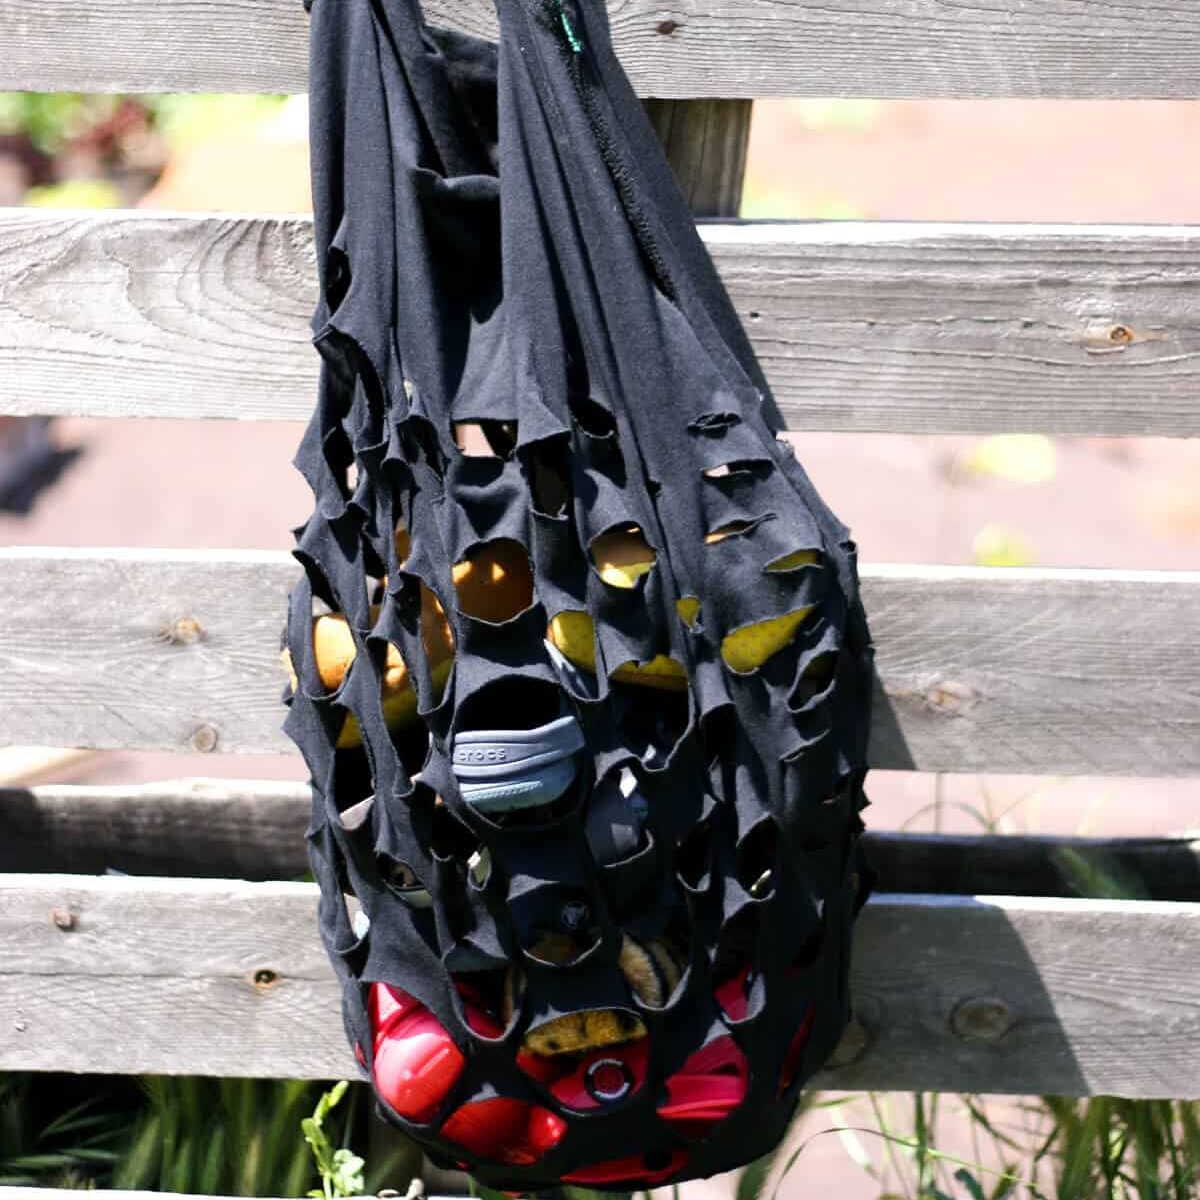 A handmade t-shirt black produce style bag with slits cut into it, filled with beach items hanging on a wood fence.